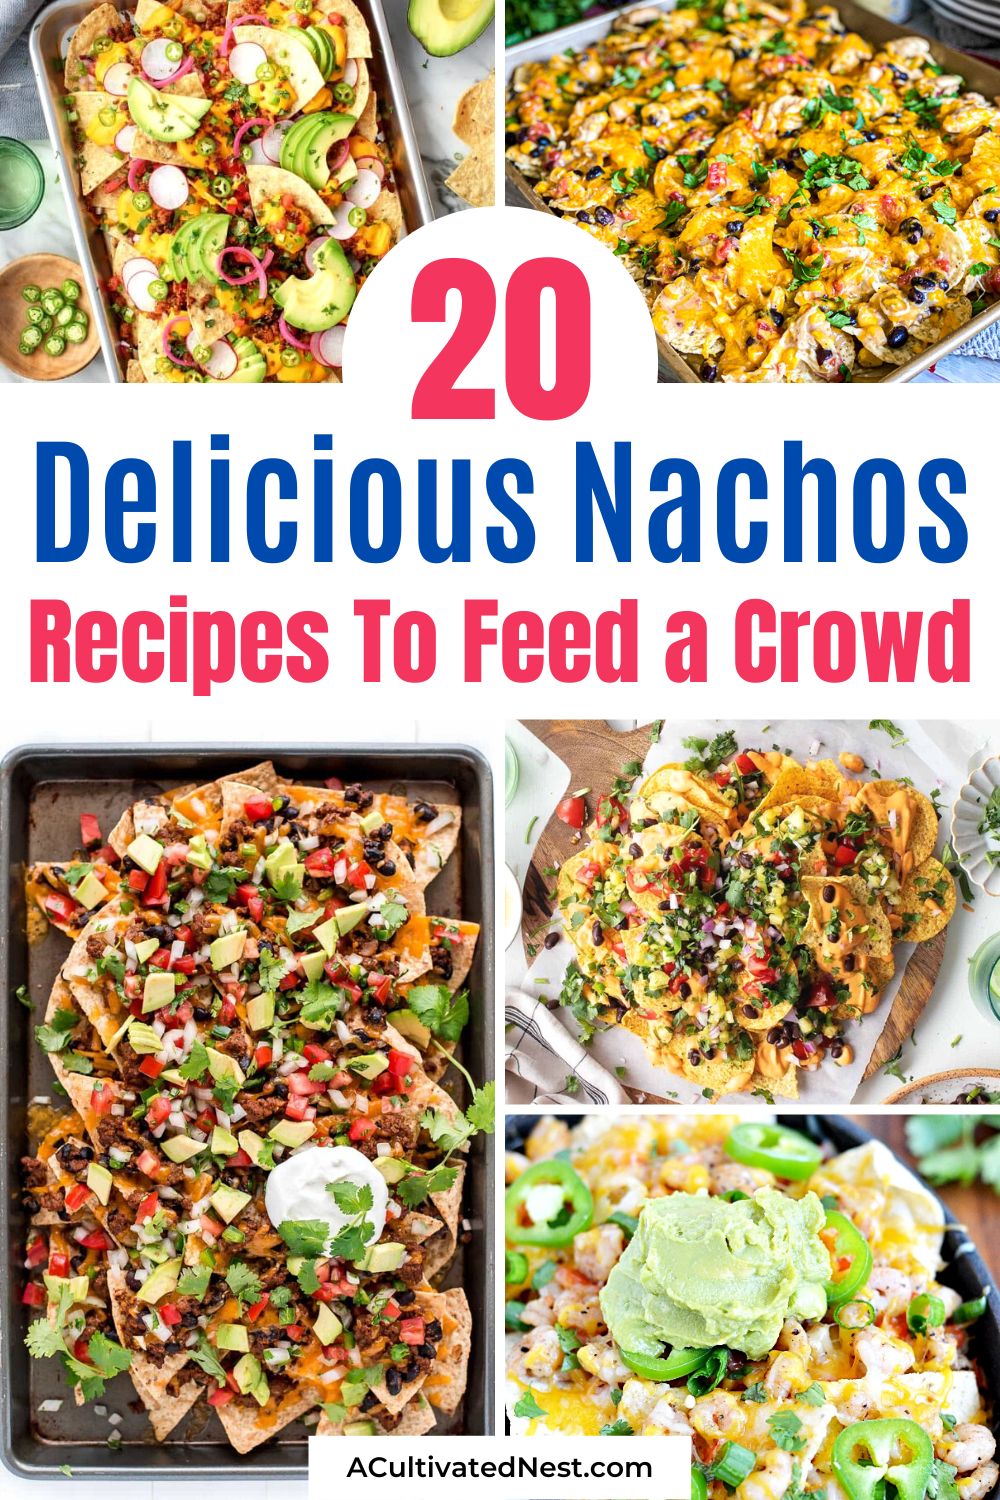 20 Delicious Nachos Recipes to Feed a Crowd- If you're having a big get-together, then you need to try some nachos recipes to feed your crowd! Everyone will be enjoy them, and most of these recipes don't take long to make! | #nachosRecipes #recipes #recipeIdeas #dessertNachos #ACultivatedNest